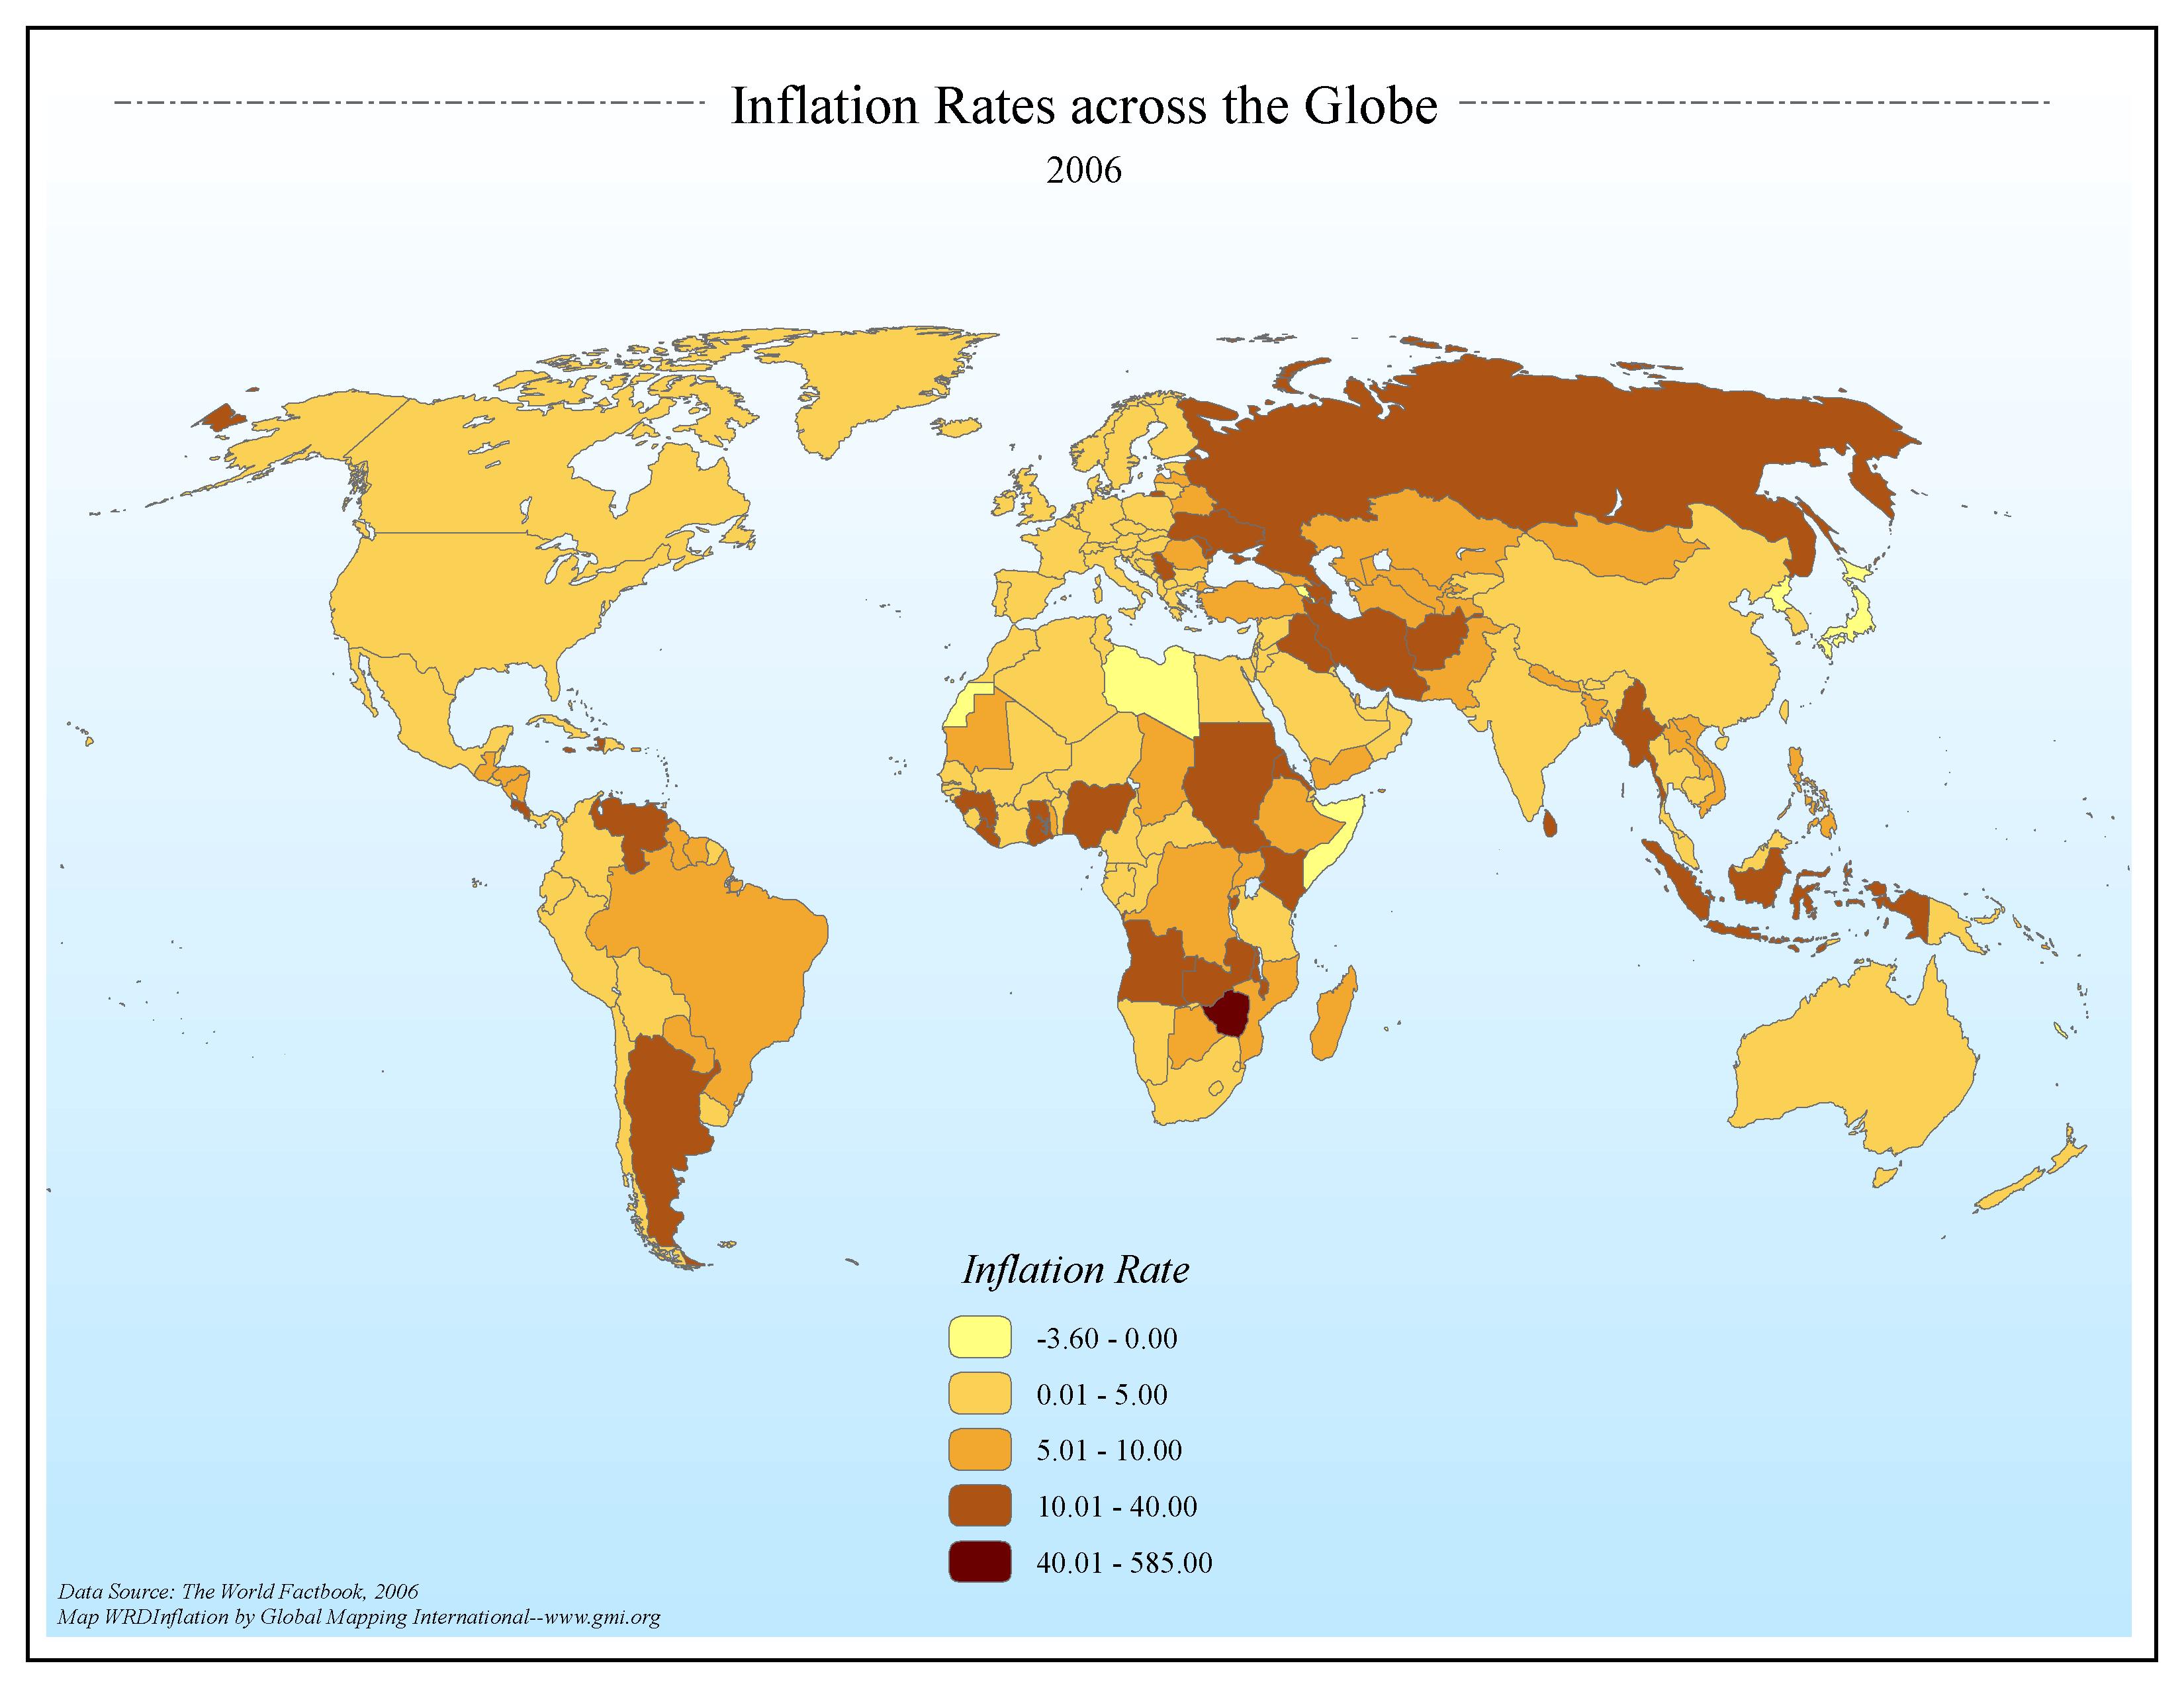 Inflation Rates across the Globe 2006